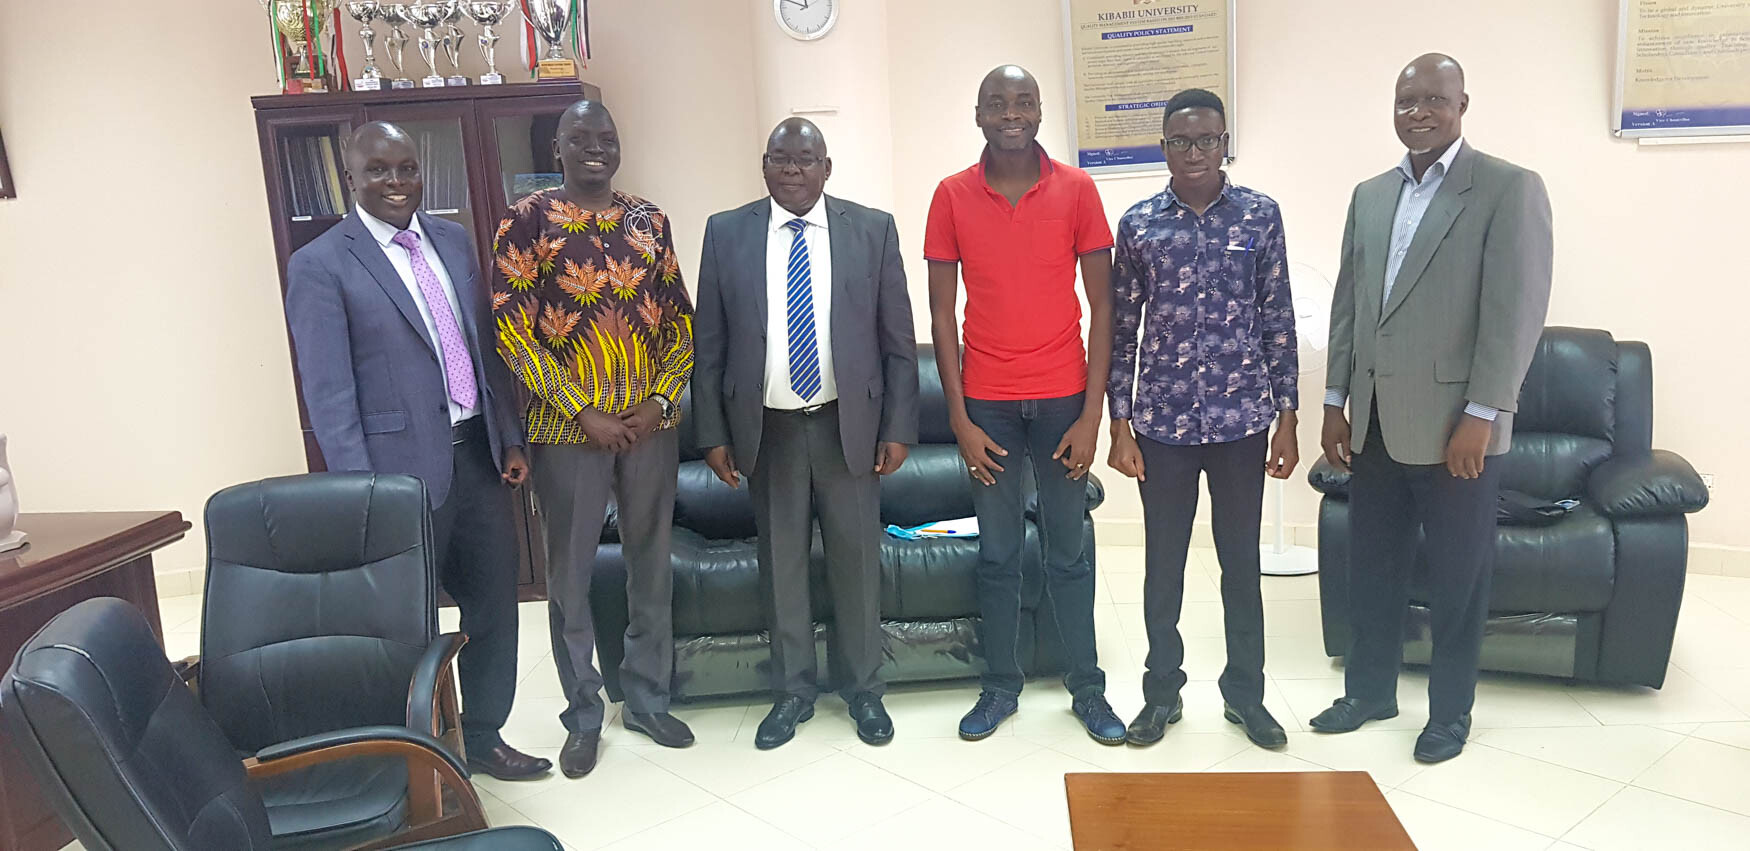 Hon. Manasseh Daniel Zindo Pays Courtesy Call on the Vice Chancellor